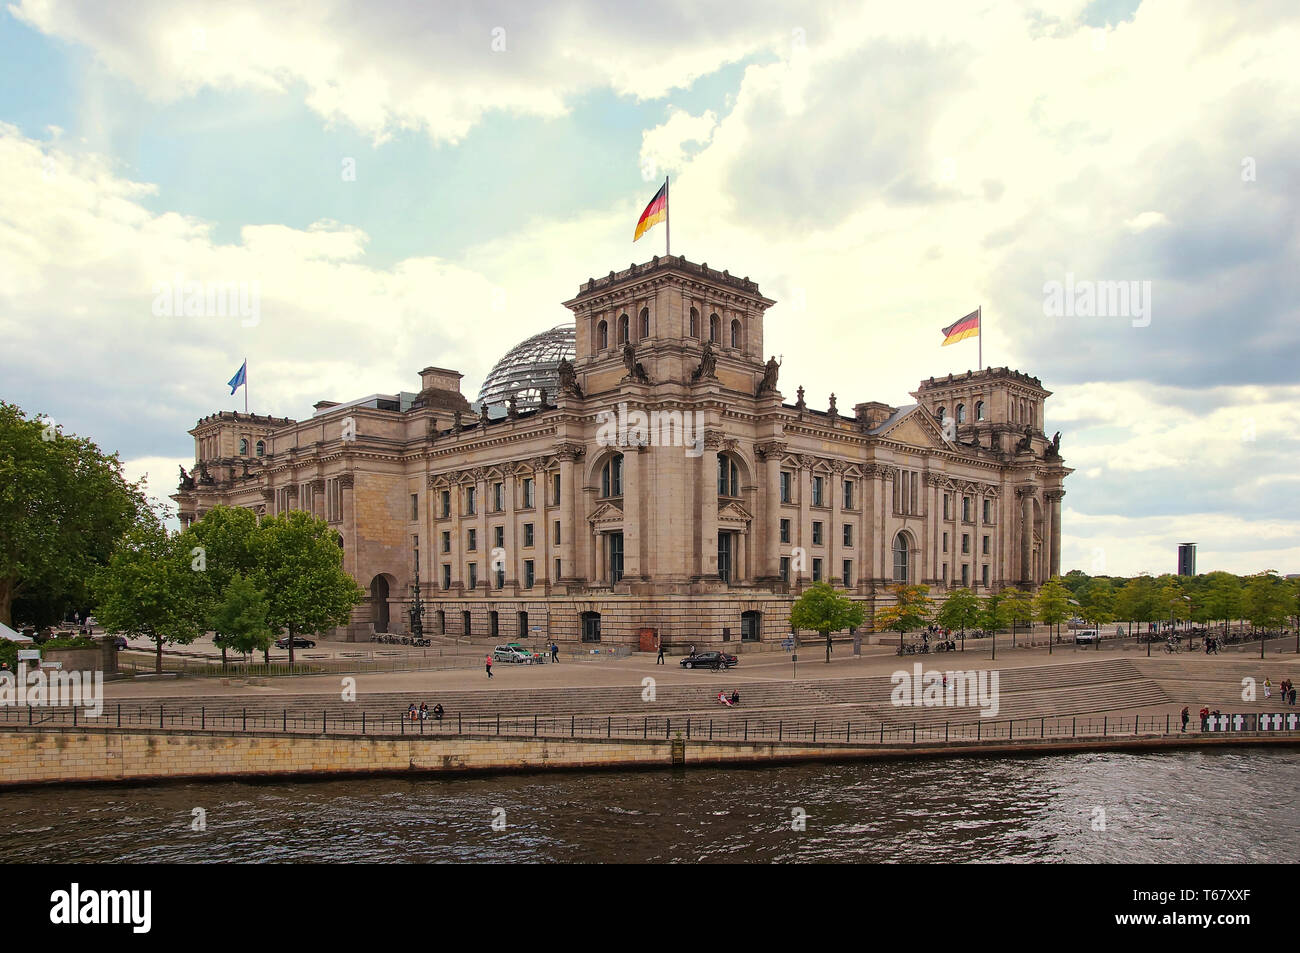 The Reichstag building in Berlin, Germany Stock Photo